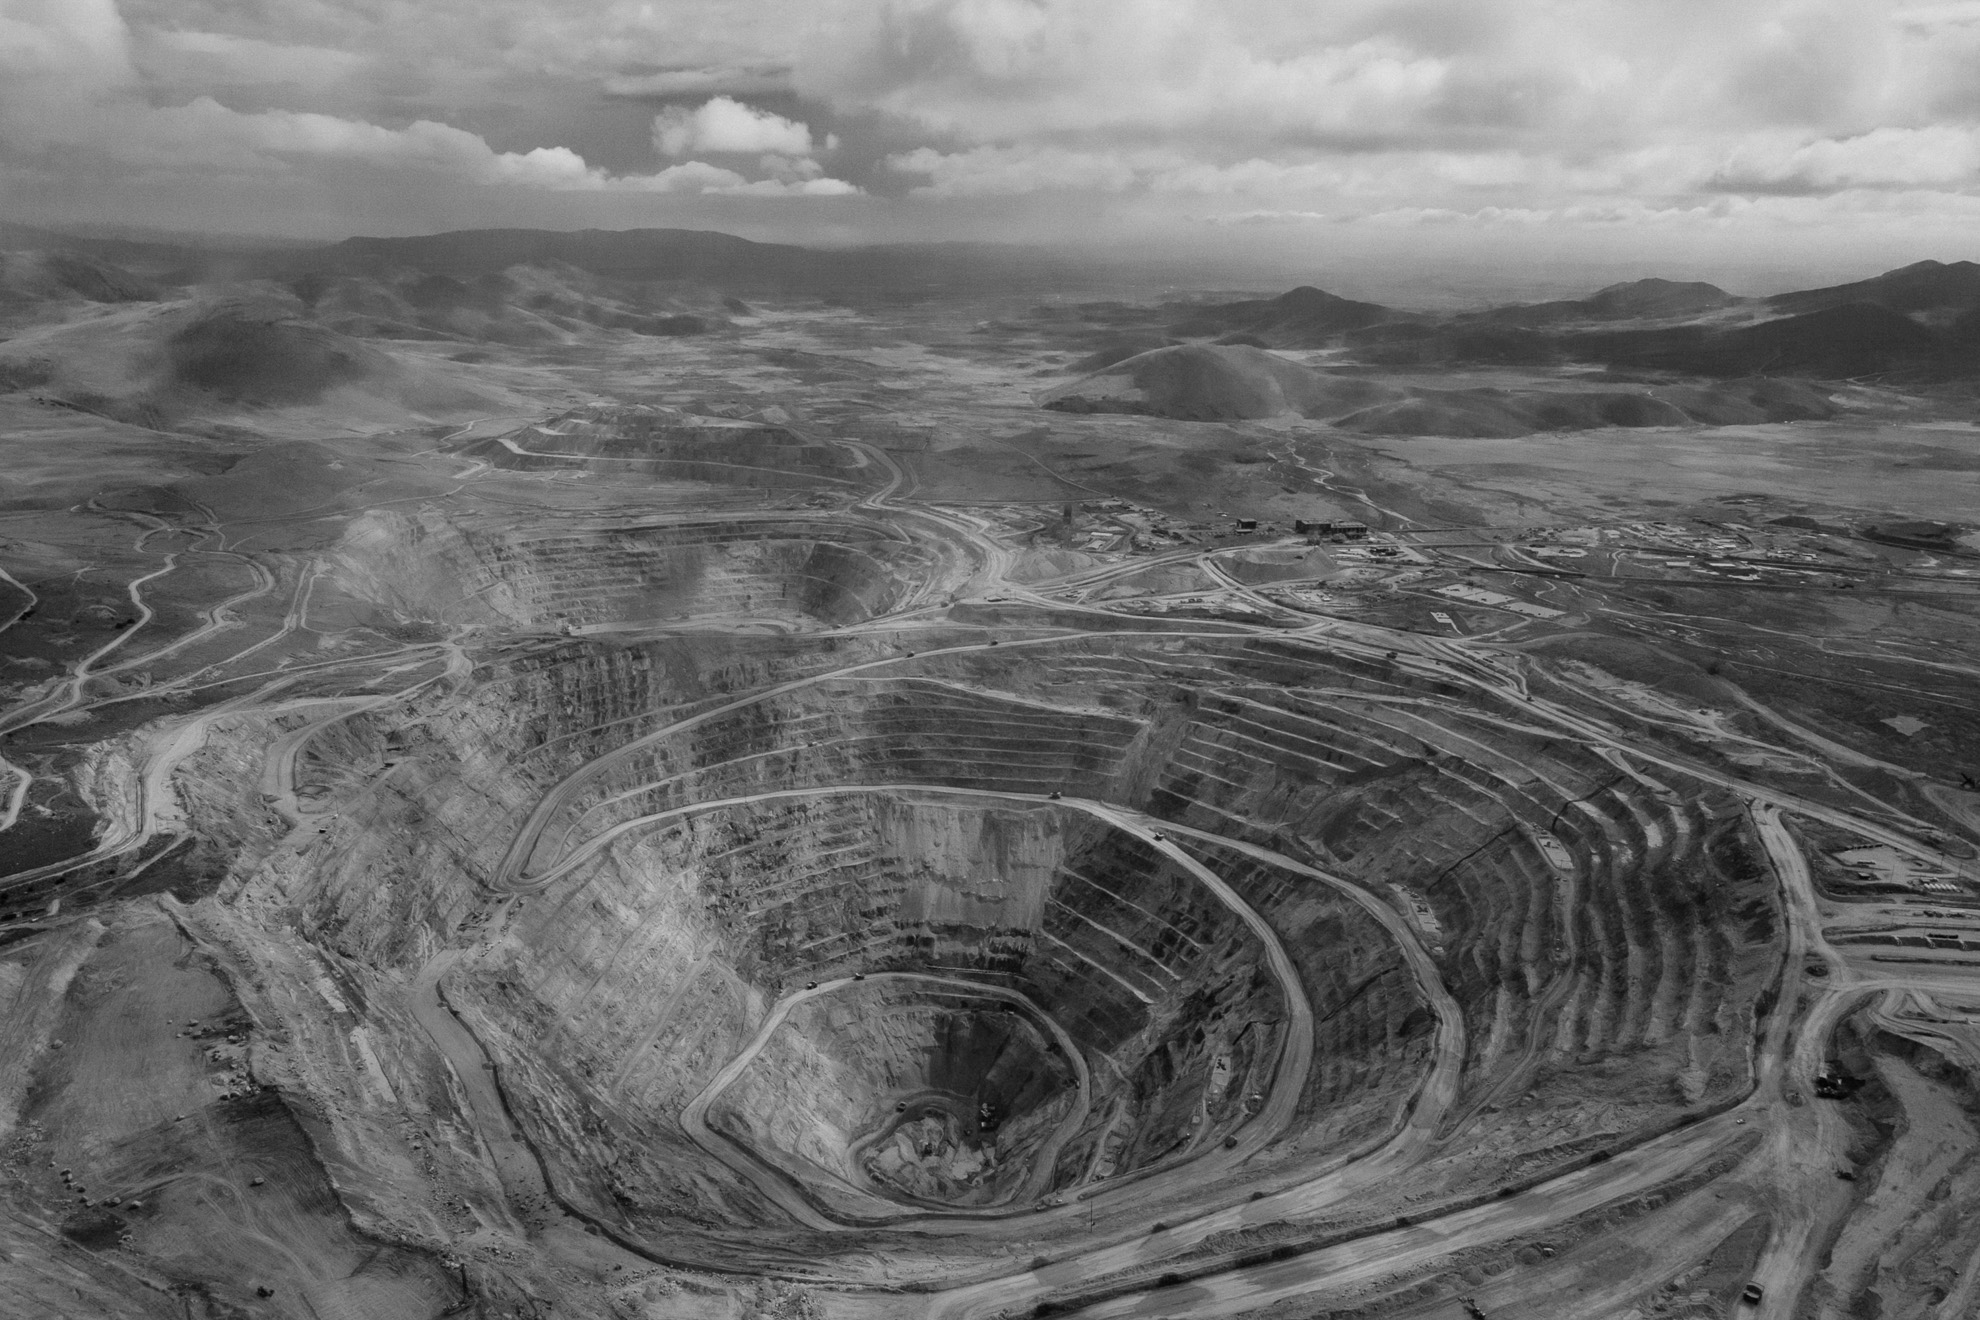 Air drone view of the Tintaya mine, Espinar, Peru. Large sections of territory have been bought by a powerful multinational (Glencore) that gives shape to the enormous extraction complexes of Tintaya, Antapaccay, and Coroccohuaycco (today about 40% of the district's territory is granted to mining companies) disappointing the inhabitants of the communities and causing a net deterioration of their conditions, creating a huge imbalance between the lifestyles of those working in the mines and those who do not. The major problems afflicting territories and populations of the Espinar area are contamination of water with heavy metals and the lack of water due to mining activity.